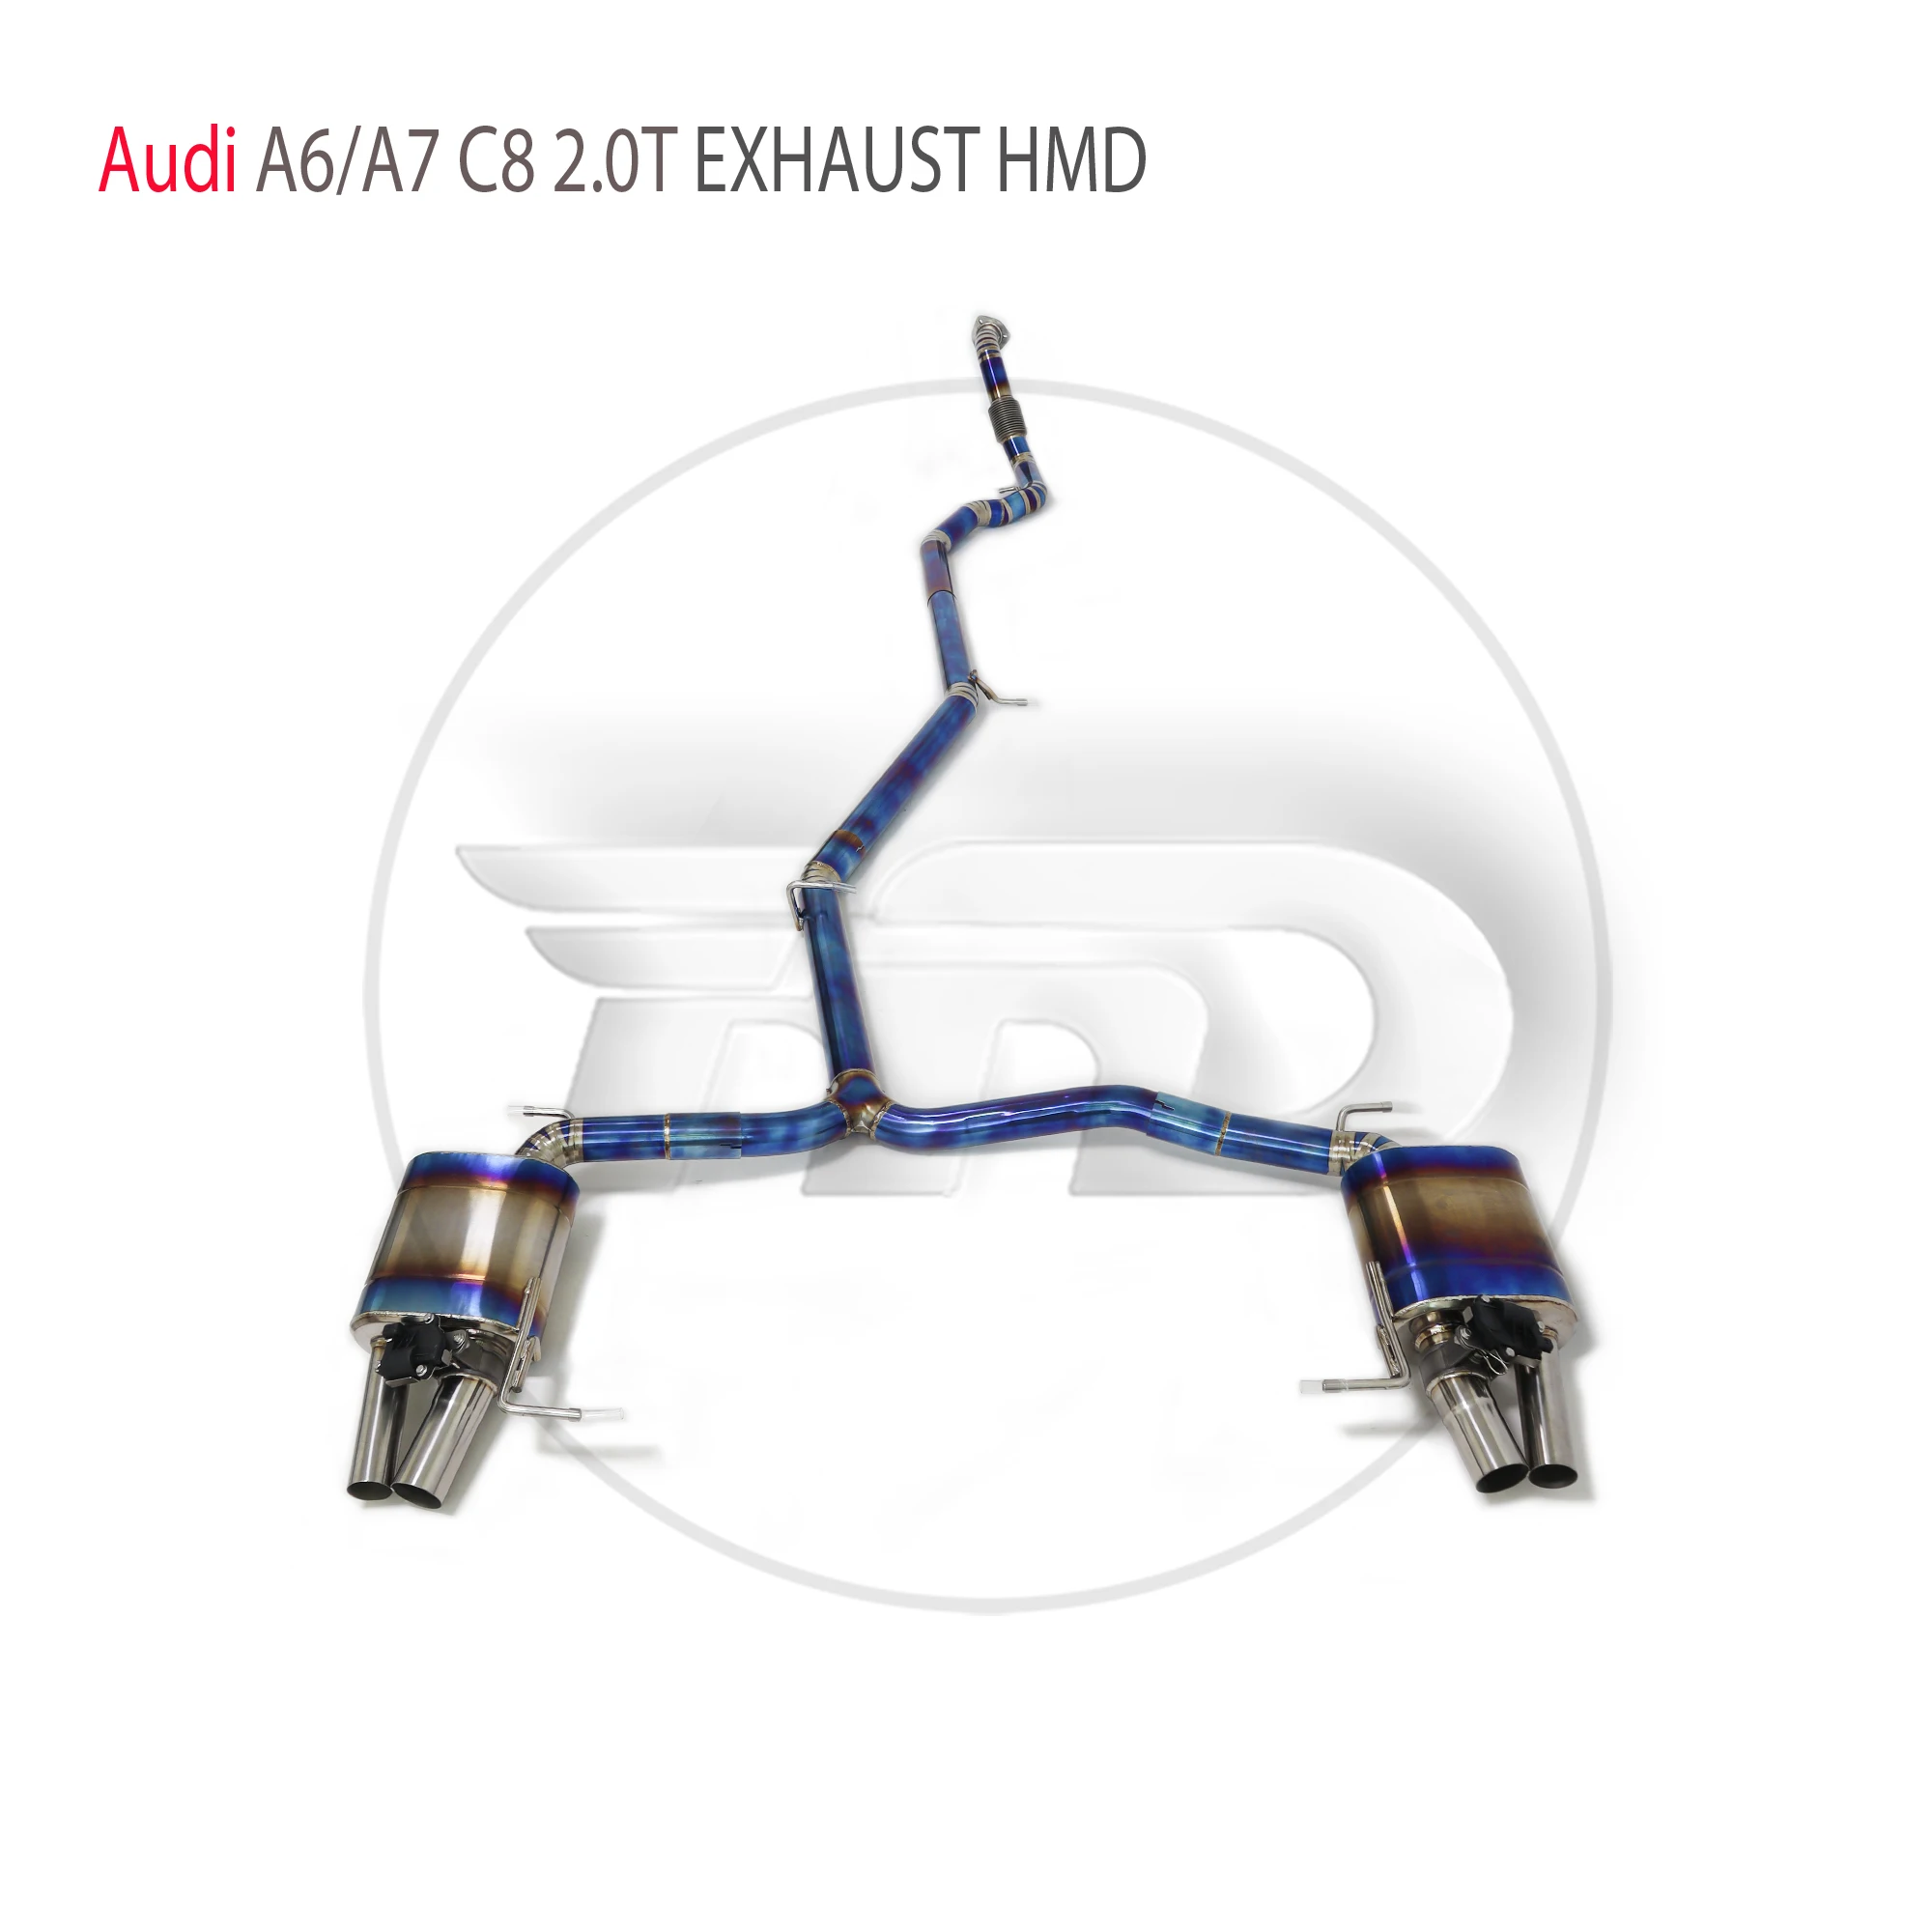 

HMD Titanium Alloy Exhaust Systems Performance Catback For Audi A6 A7 C8 2.0T Valve Muffler Front Pipe Resonator Delete